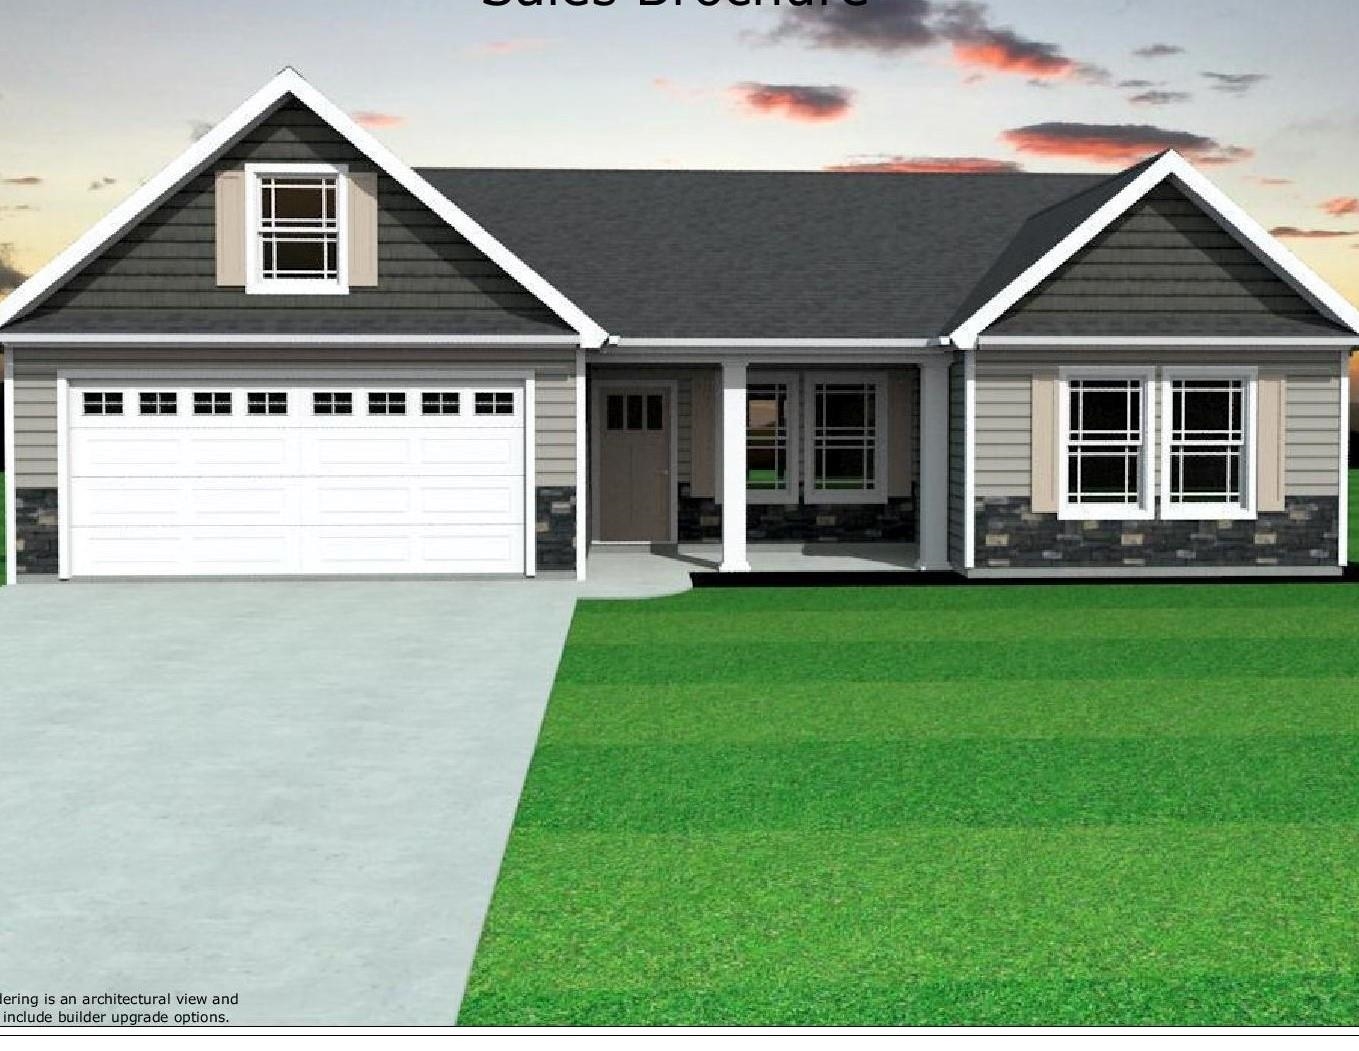 This is the STARTEX floorplan. 3 bedroom 2 bath split floorplan home, gas fireplace, walk in laundry room, trey ceiling in master bedroom. Located in the NEW Elliott park community in Lyman just minutes from Spartanburg and Greenville. Call today for more info!